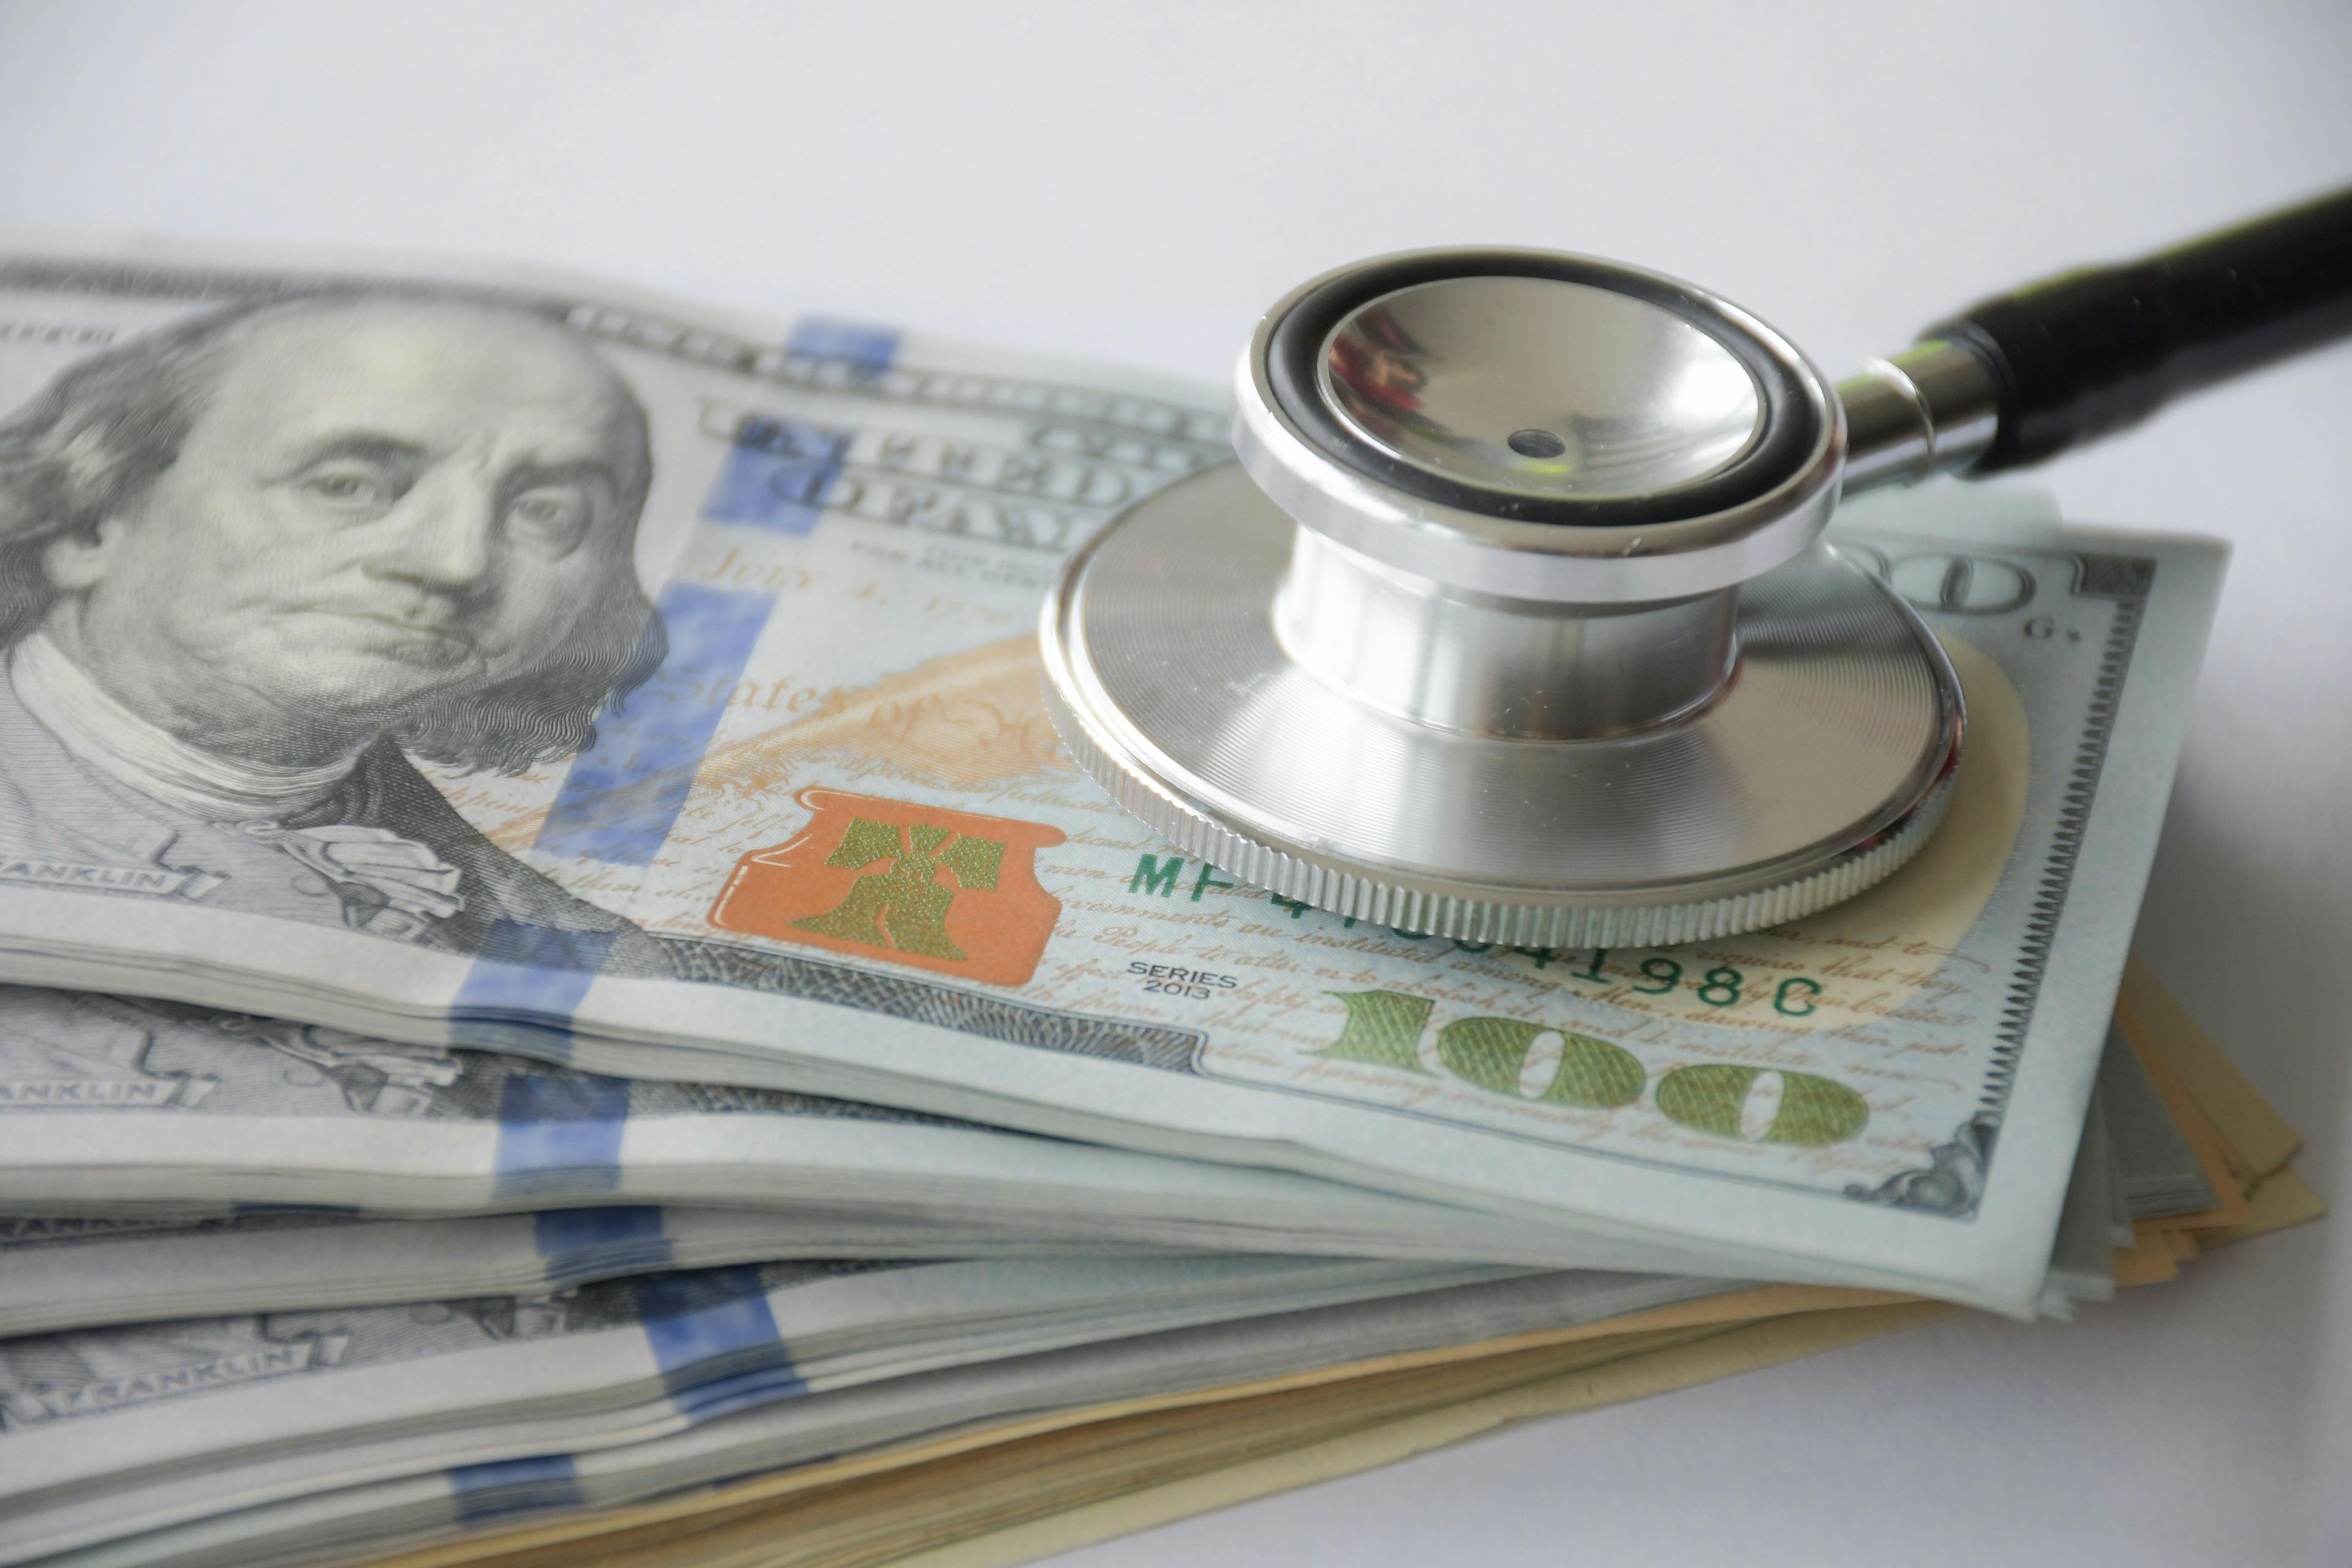 The Centers for Medicare & Medicaid Services proposed tougher rules for hospitals that aren't complying with federal rules on price transparency. (Image credit: BUSARA - stock.adobe.com)